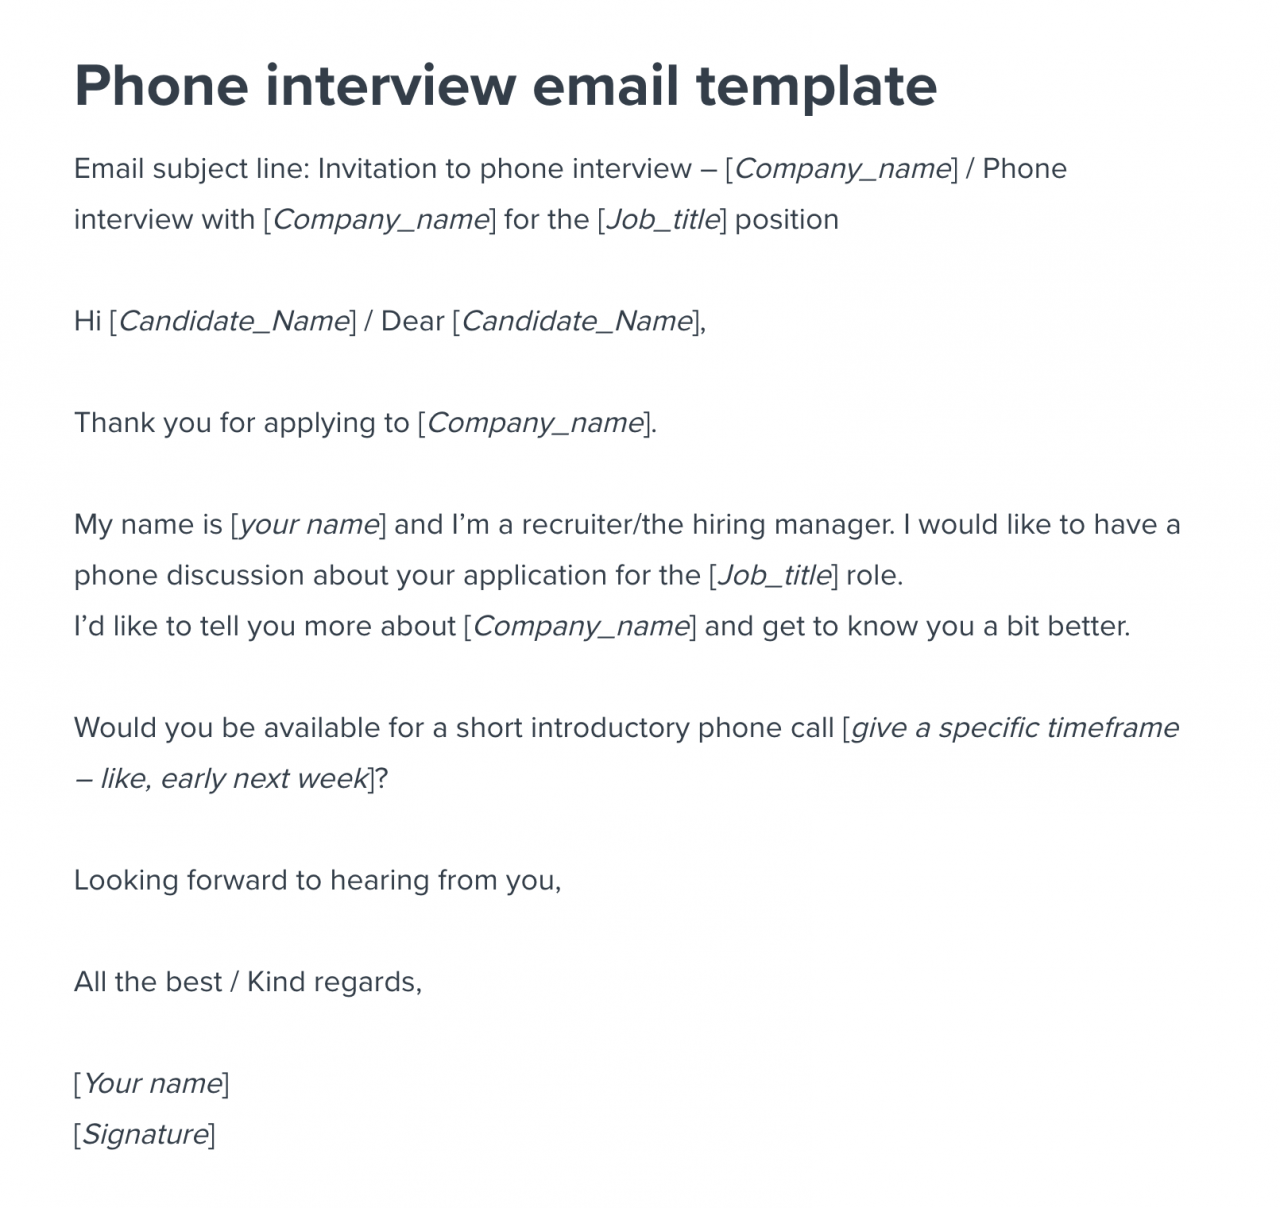 An invitation to a job interview